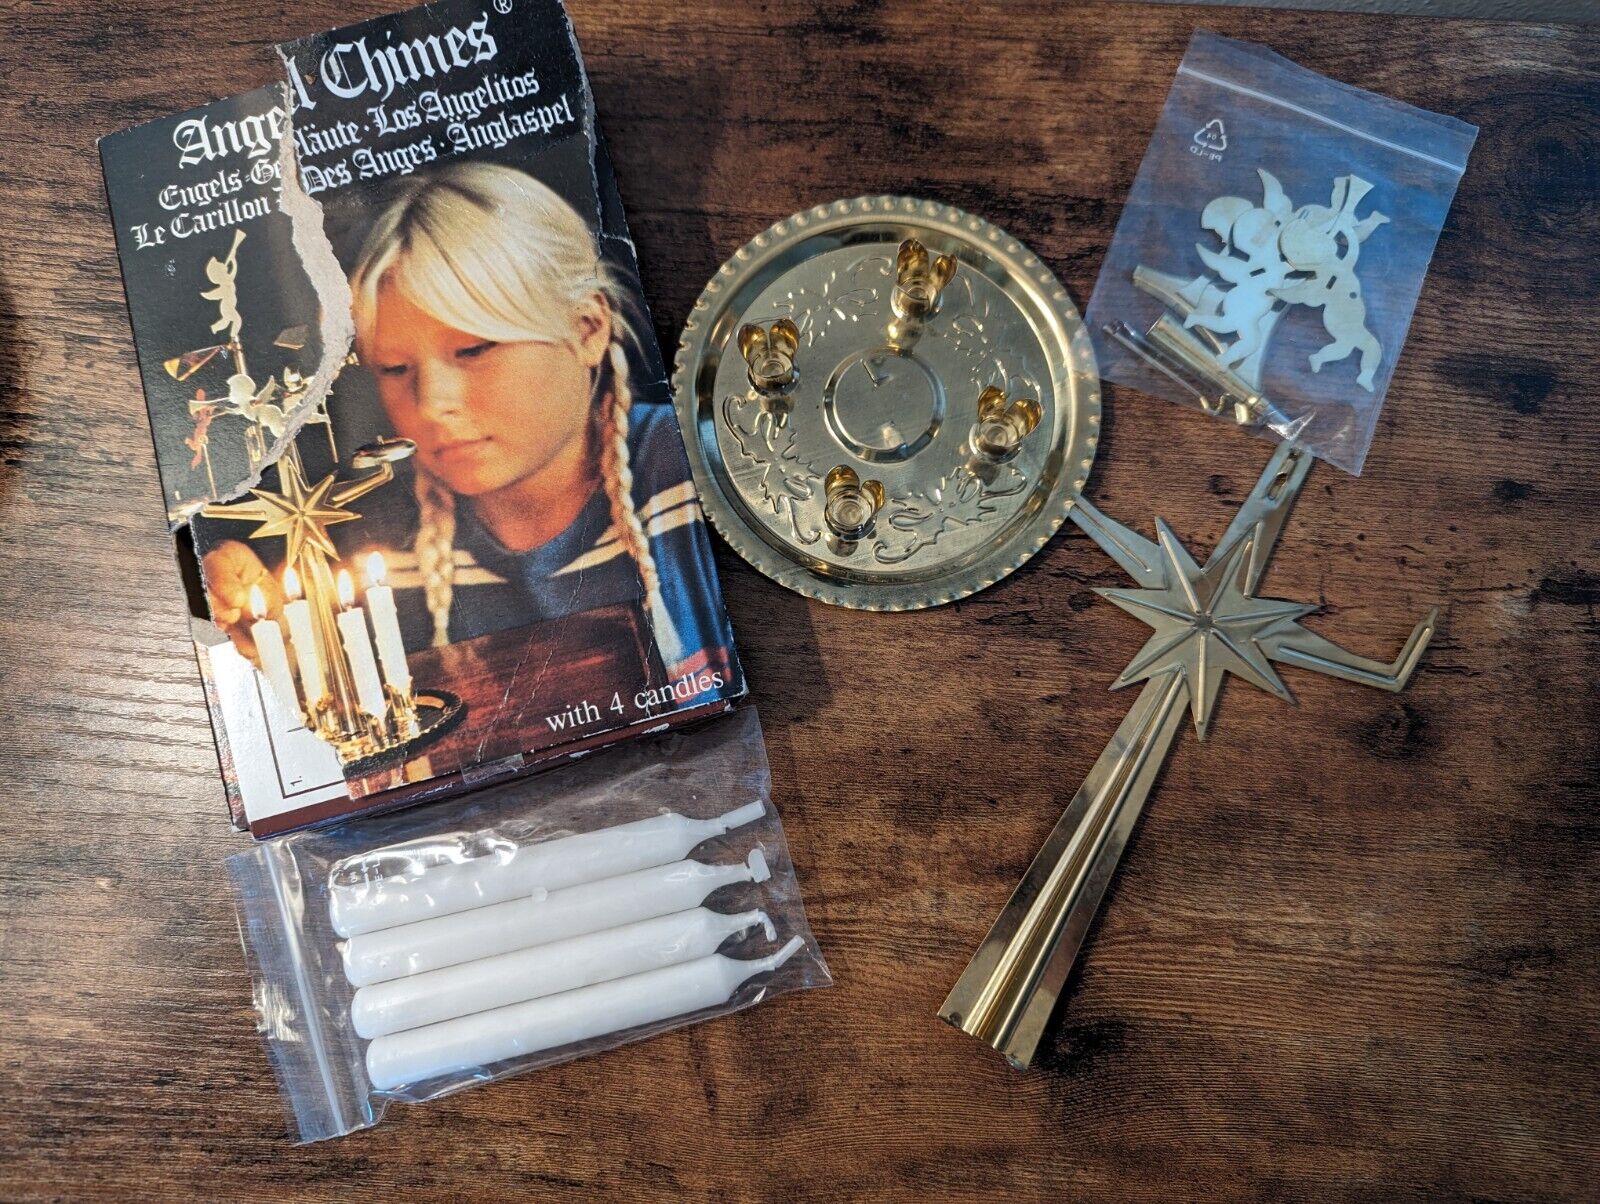 AUTHENTIC SWEDISH ANGEL CHIMES & CANDLES, MADE IN SWEDEN, NEW